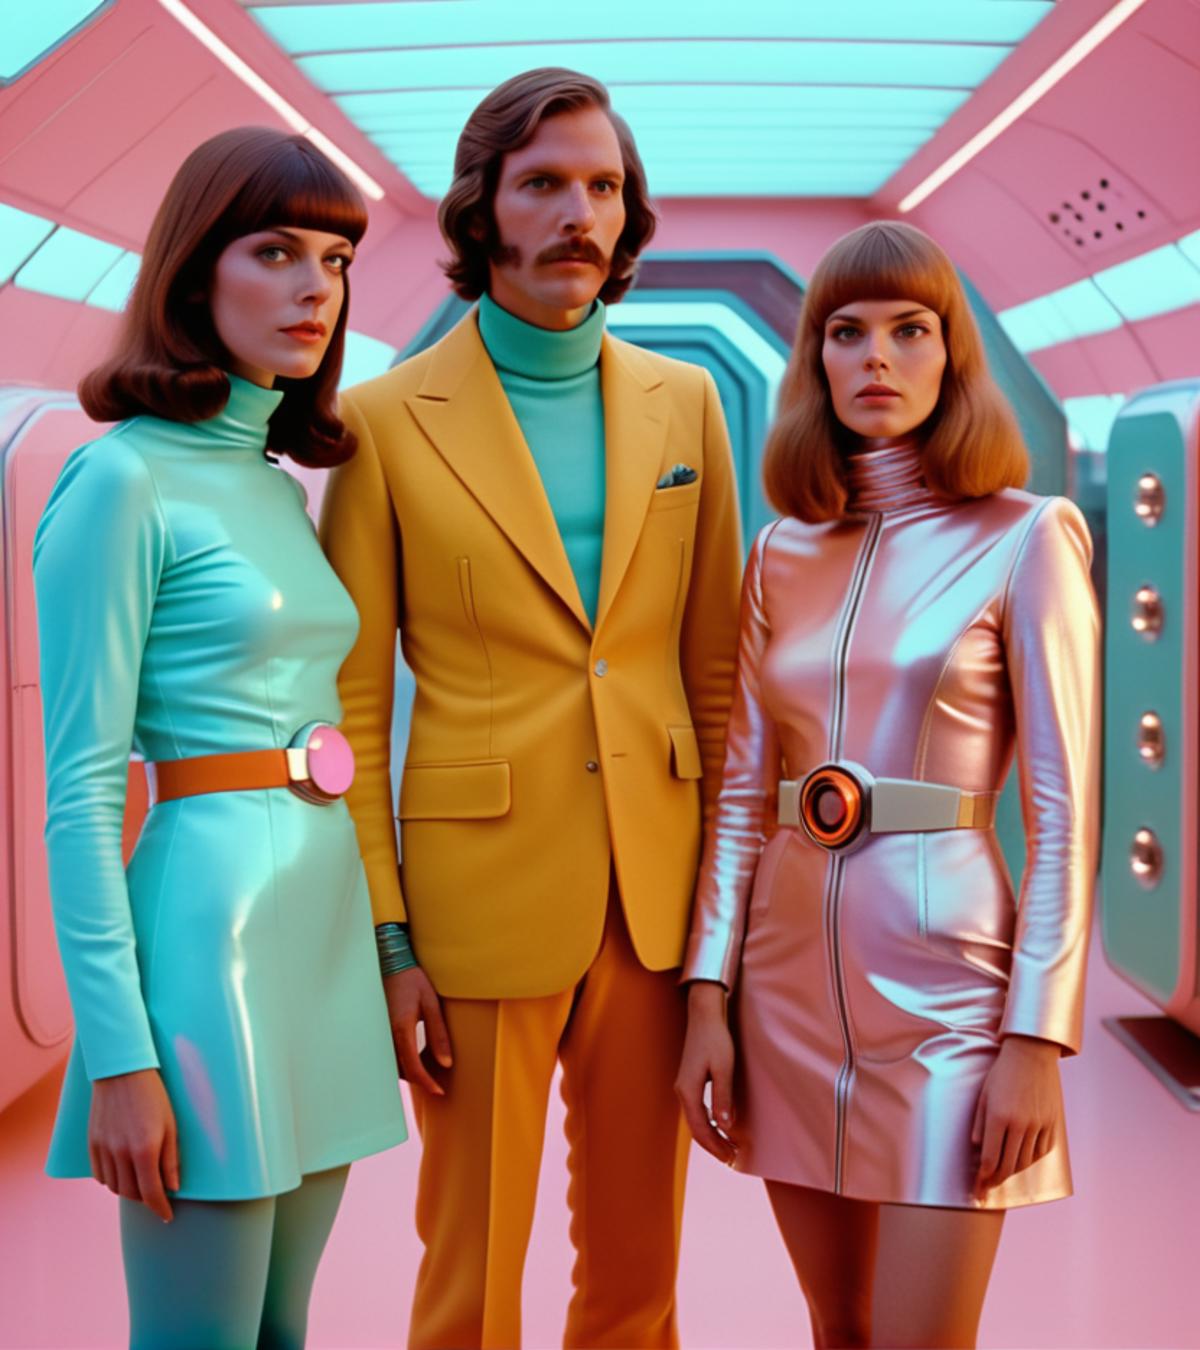 4k image from a 1970s science fiction film, imagem real, Estilo Wes Anderson, pastels colors, a man between two women wear...